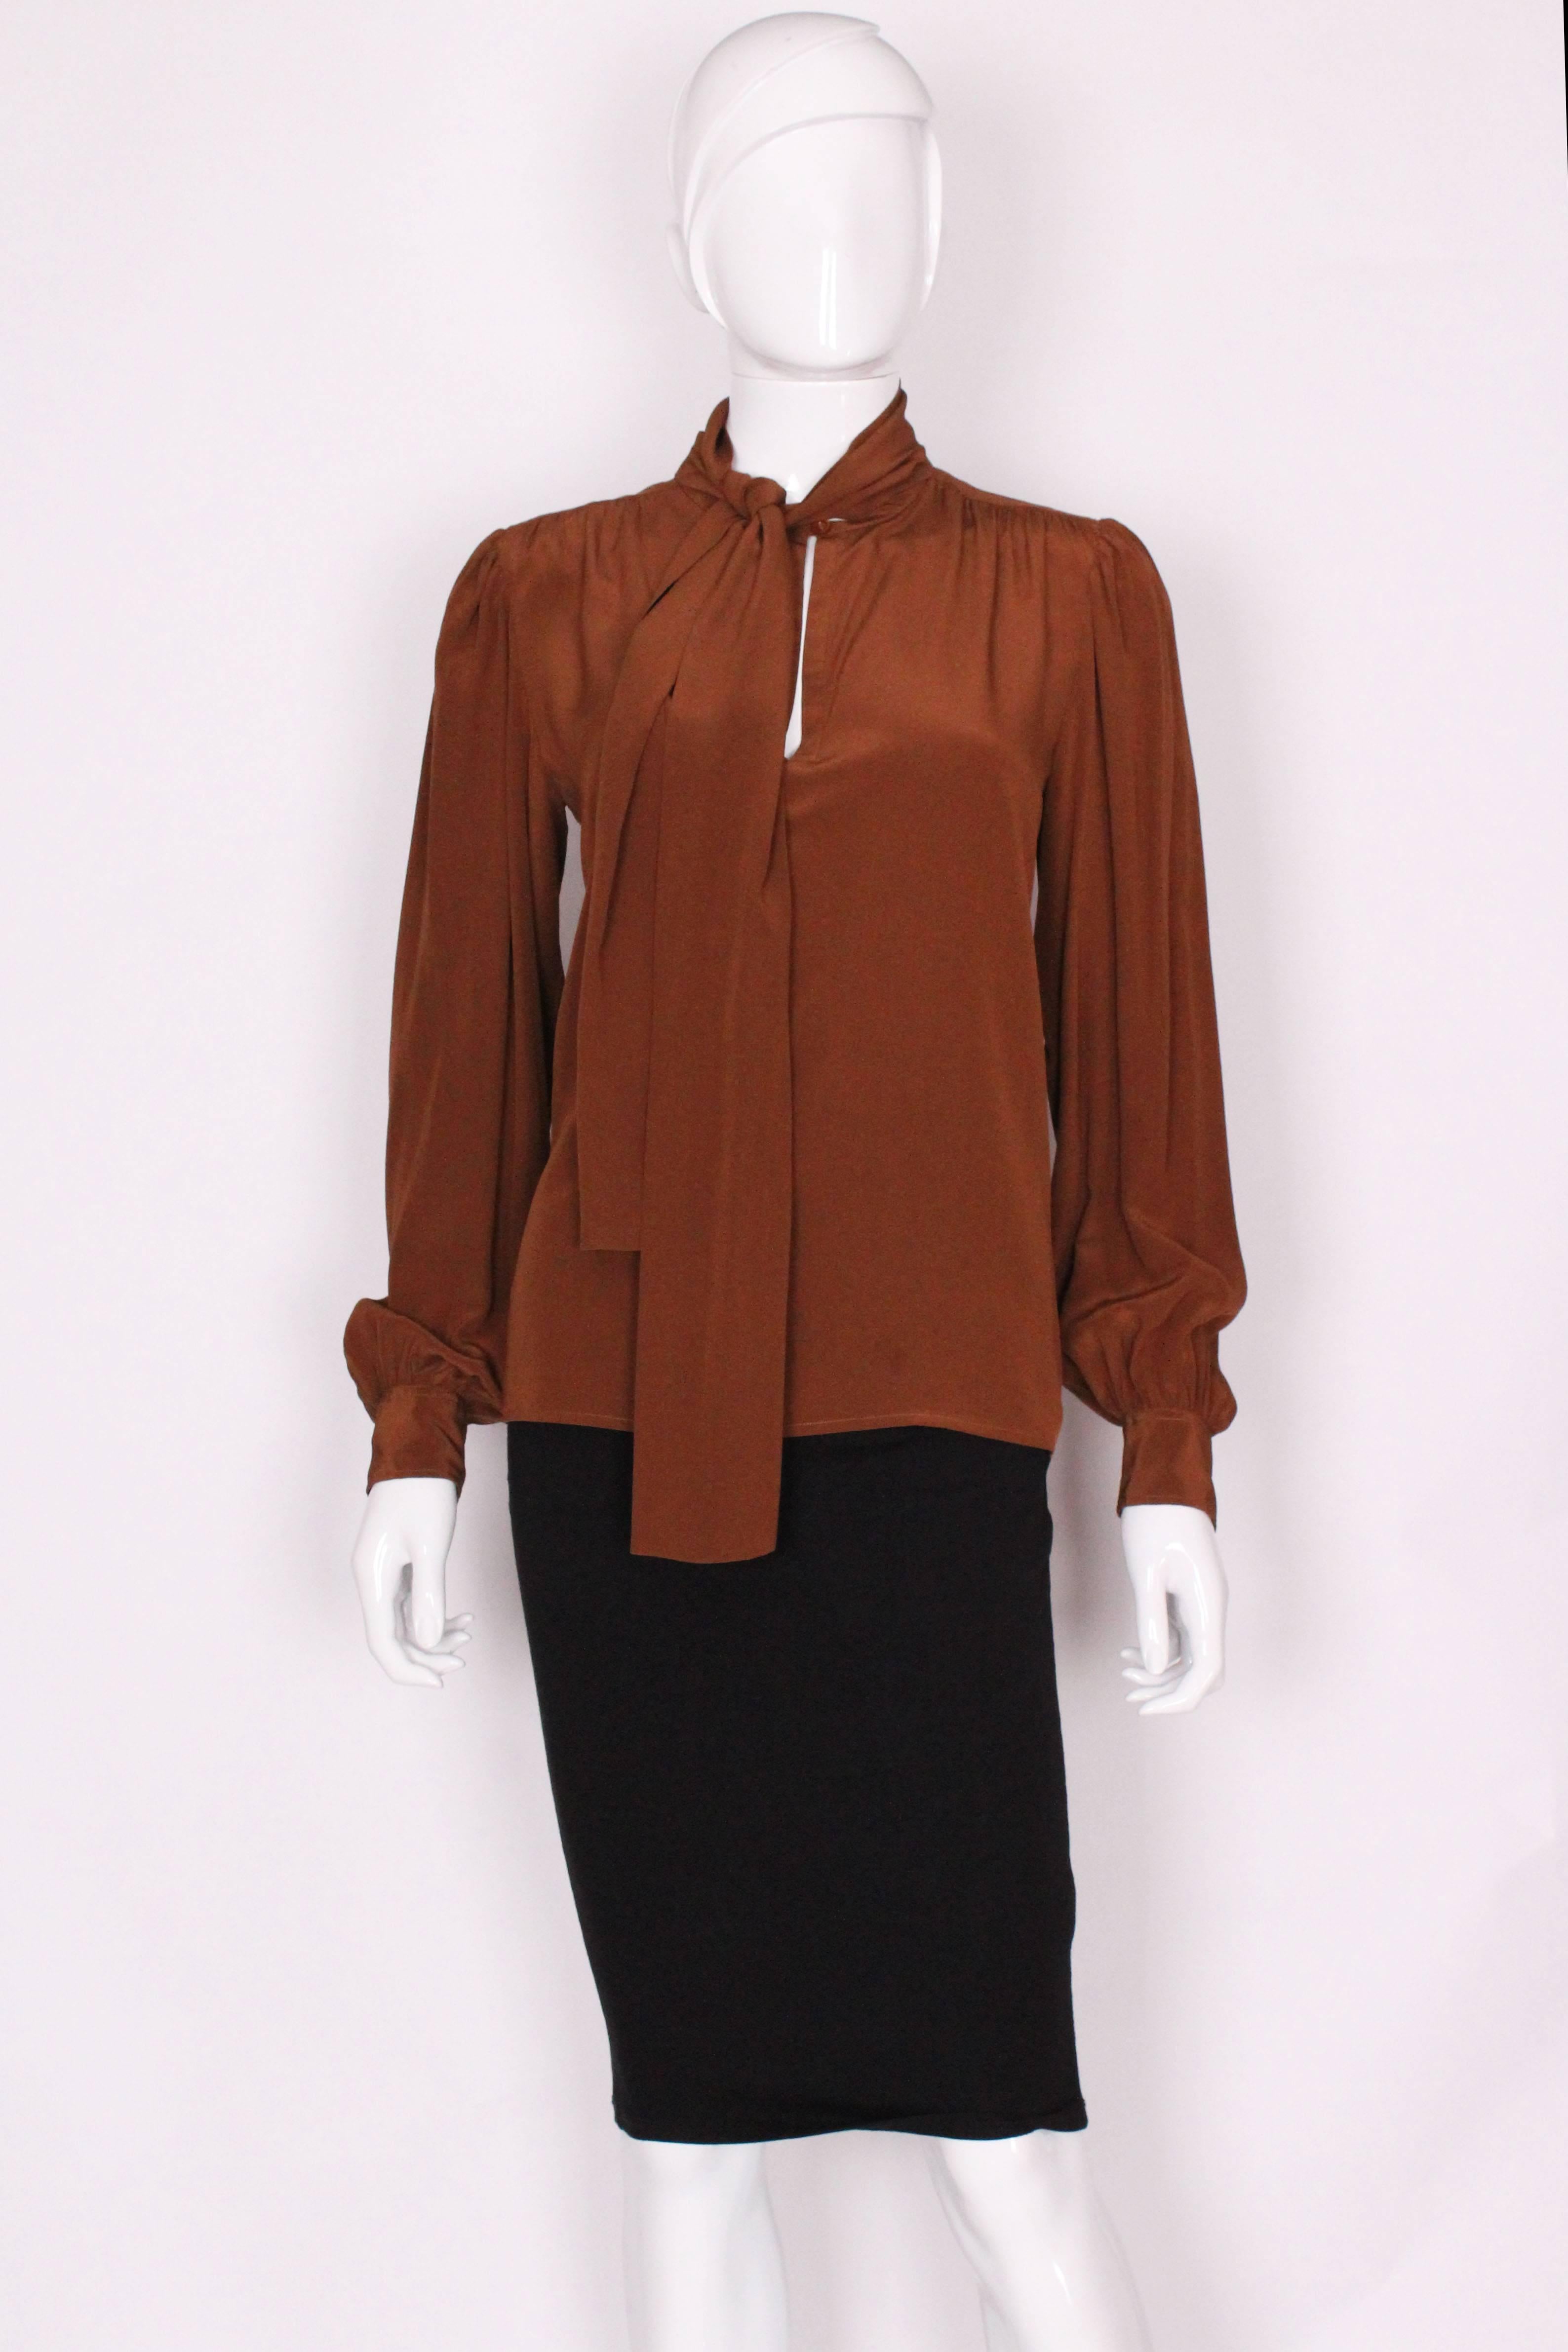 A great blouse for Fall, This silk blouse from Yves Saint Laurent  is a lovely chestnut brown colour. It has a one button opening at the neck, and one button on each cuff.There  is some gathering at the back and a pussy bow tie.